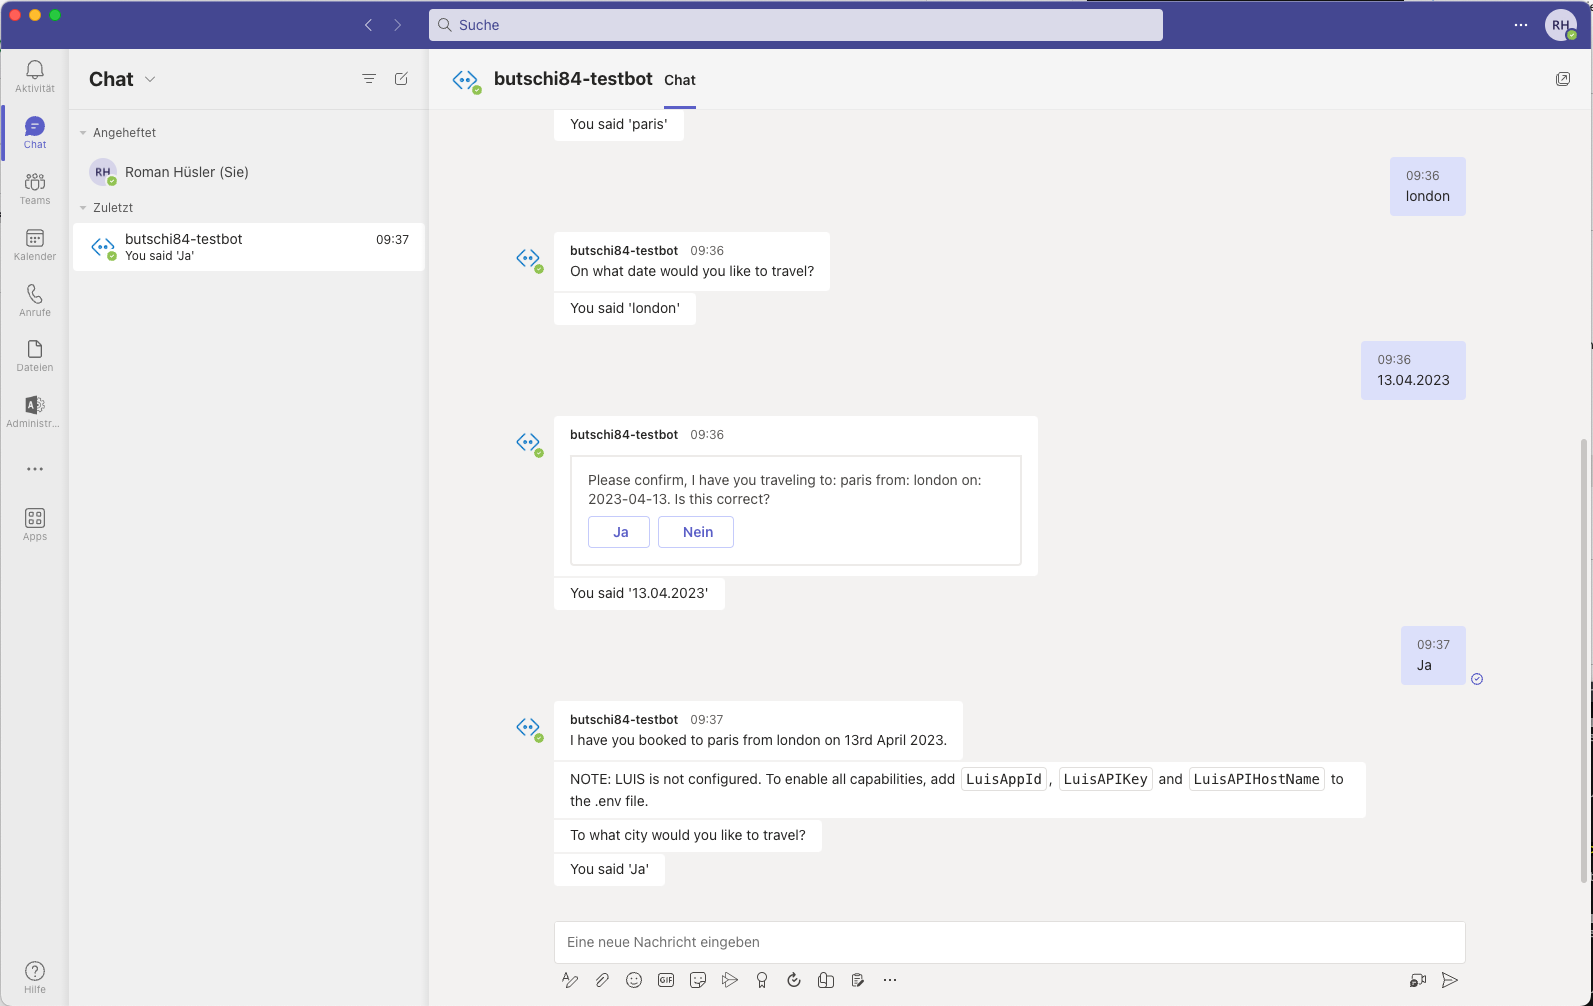 Journey to an intelligent Azure Chat Bot - Part 3